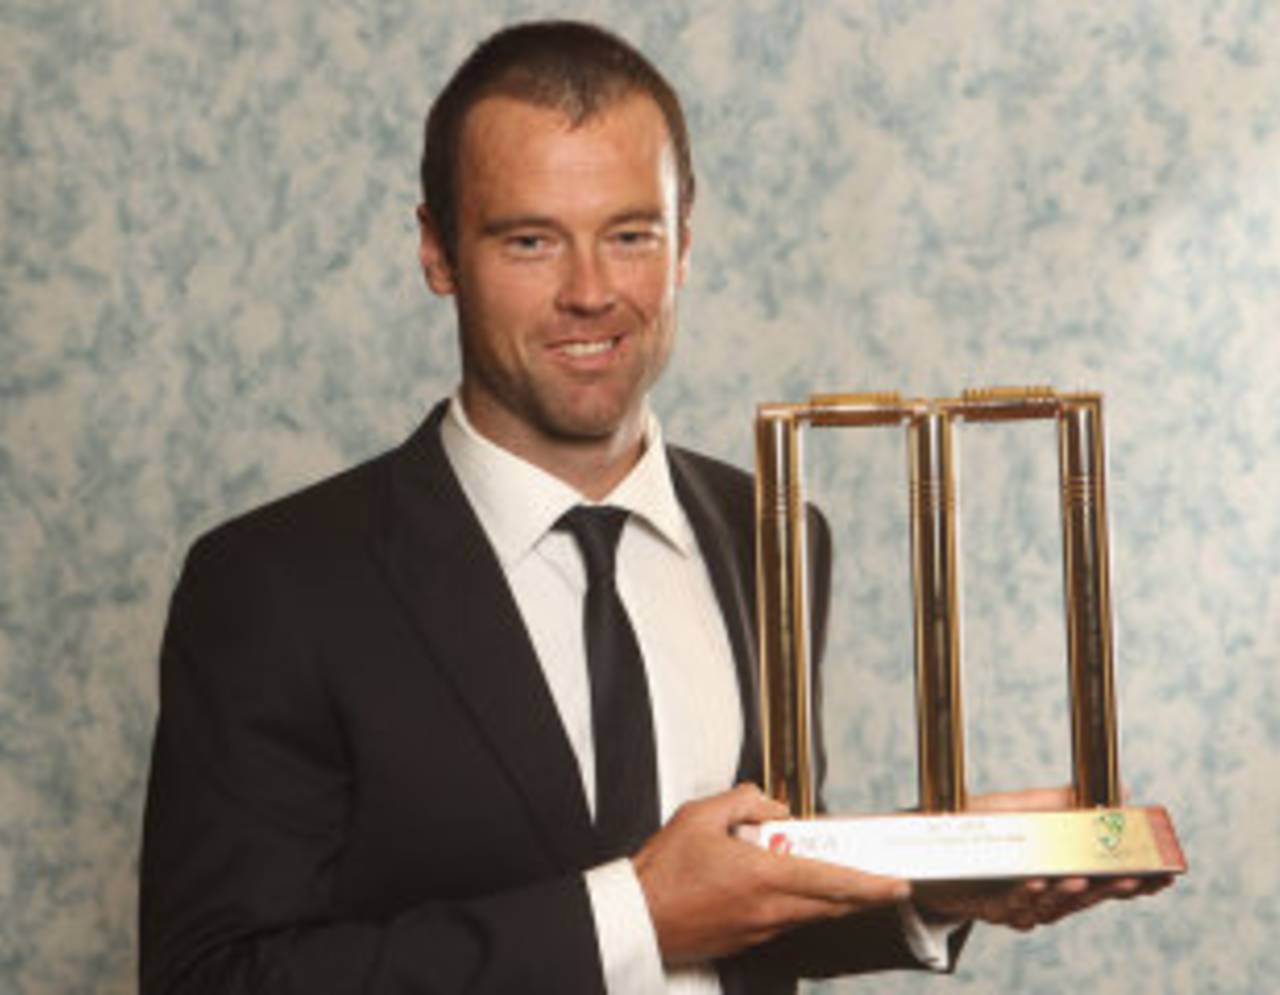 Rob Quiney with the domestic player of the year trophy at the 2012 Allan Border Medal Awards, Melbourne, February 27, 2012 